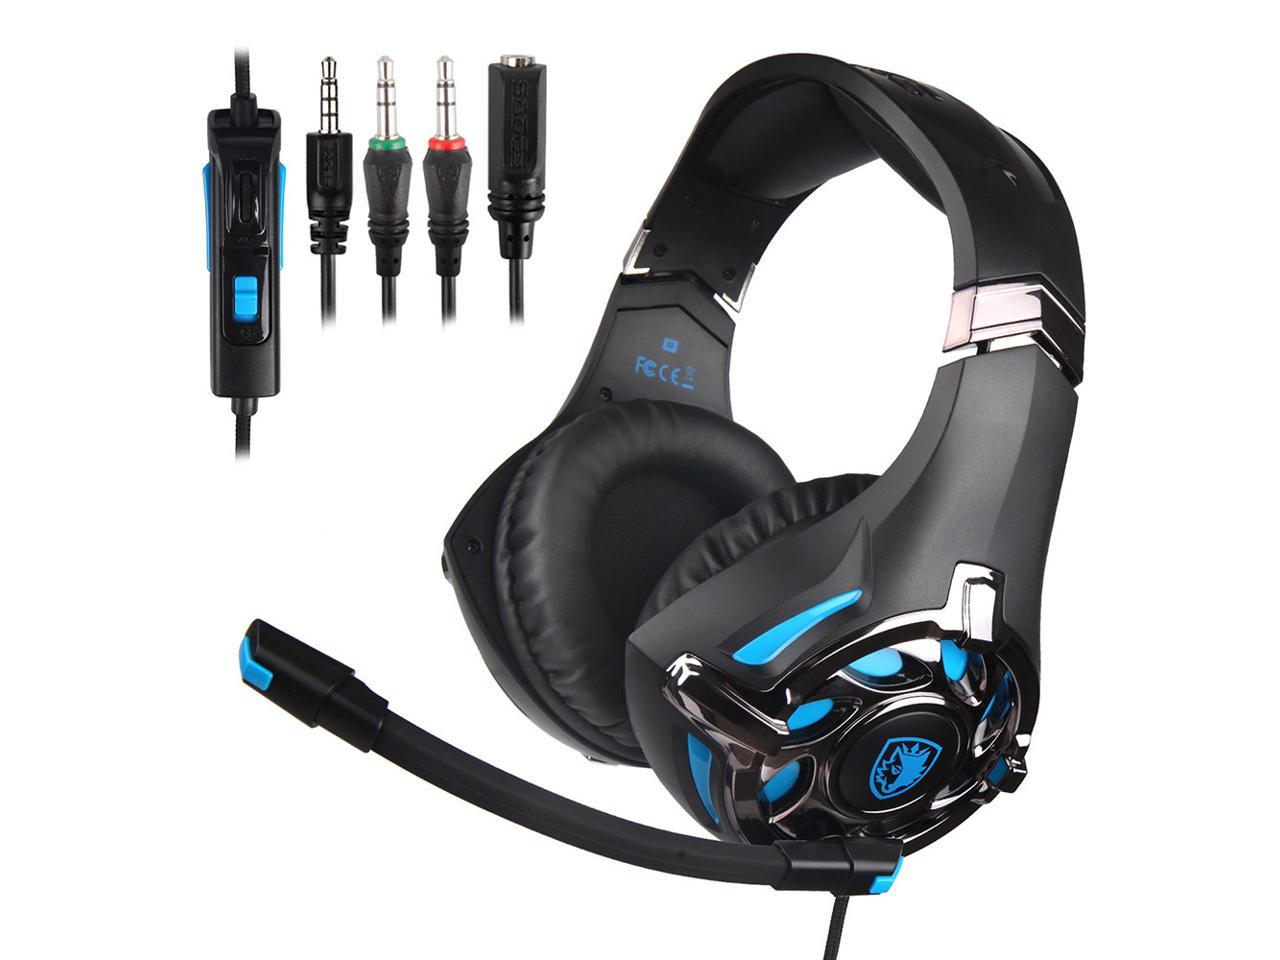 PS4 Xbox One Gaming Headset SADES SA-822 PC Gaming Headphone Stereo Sound Over-Ear Headphone with Microphone